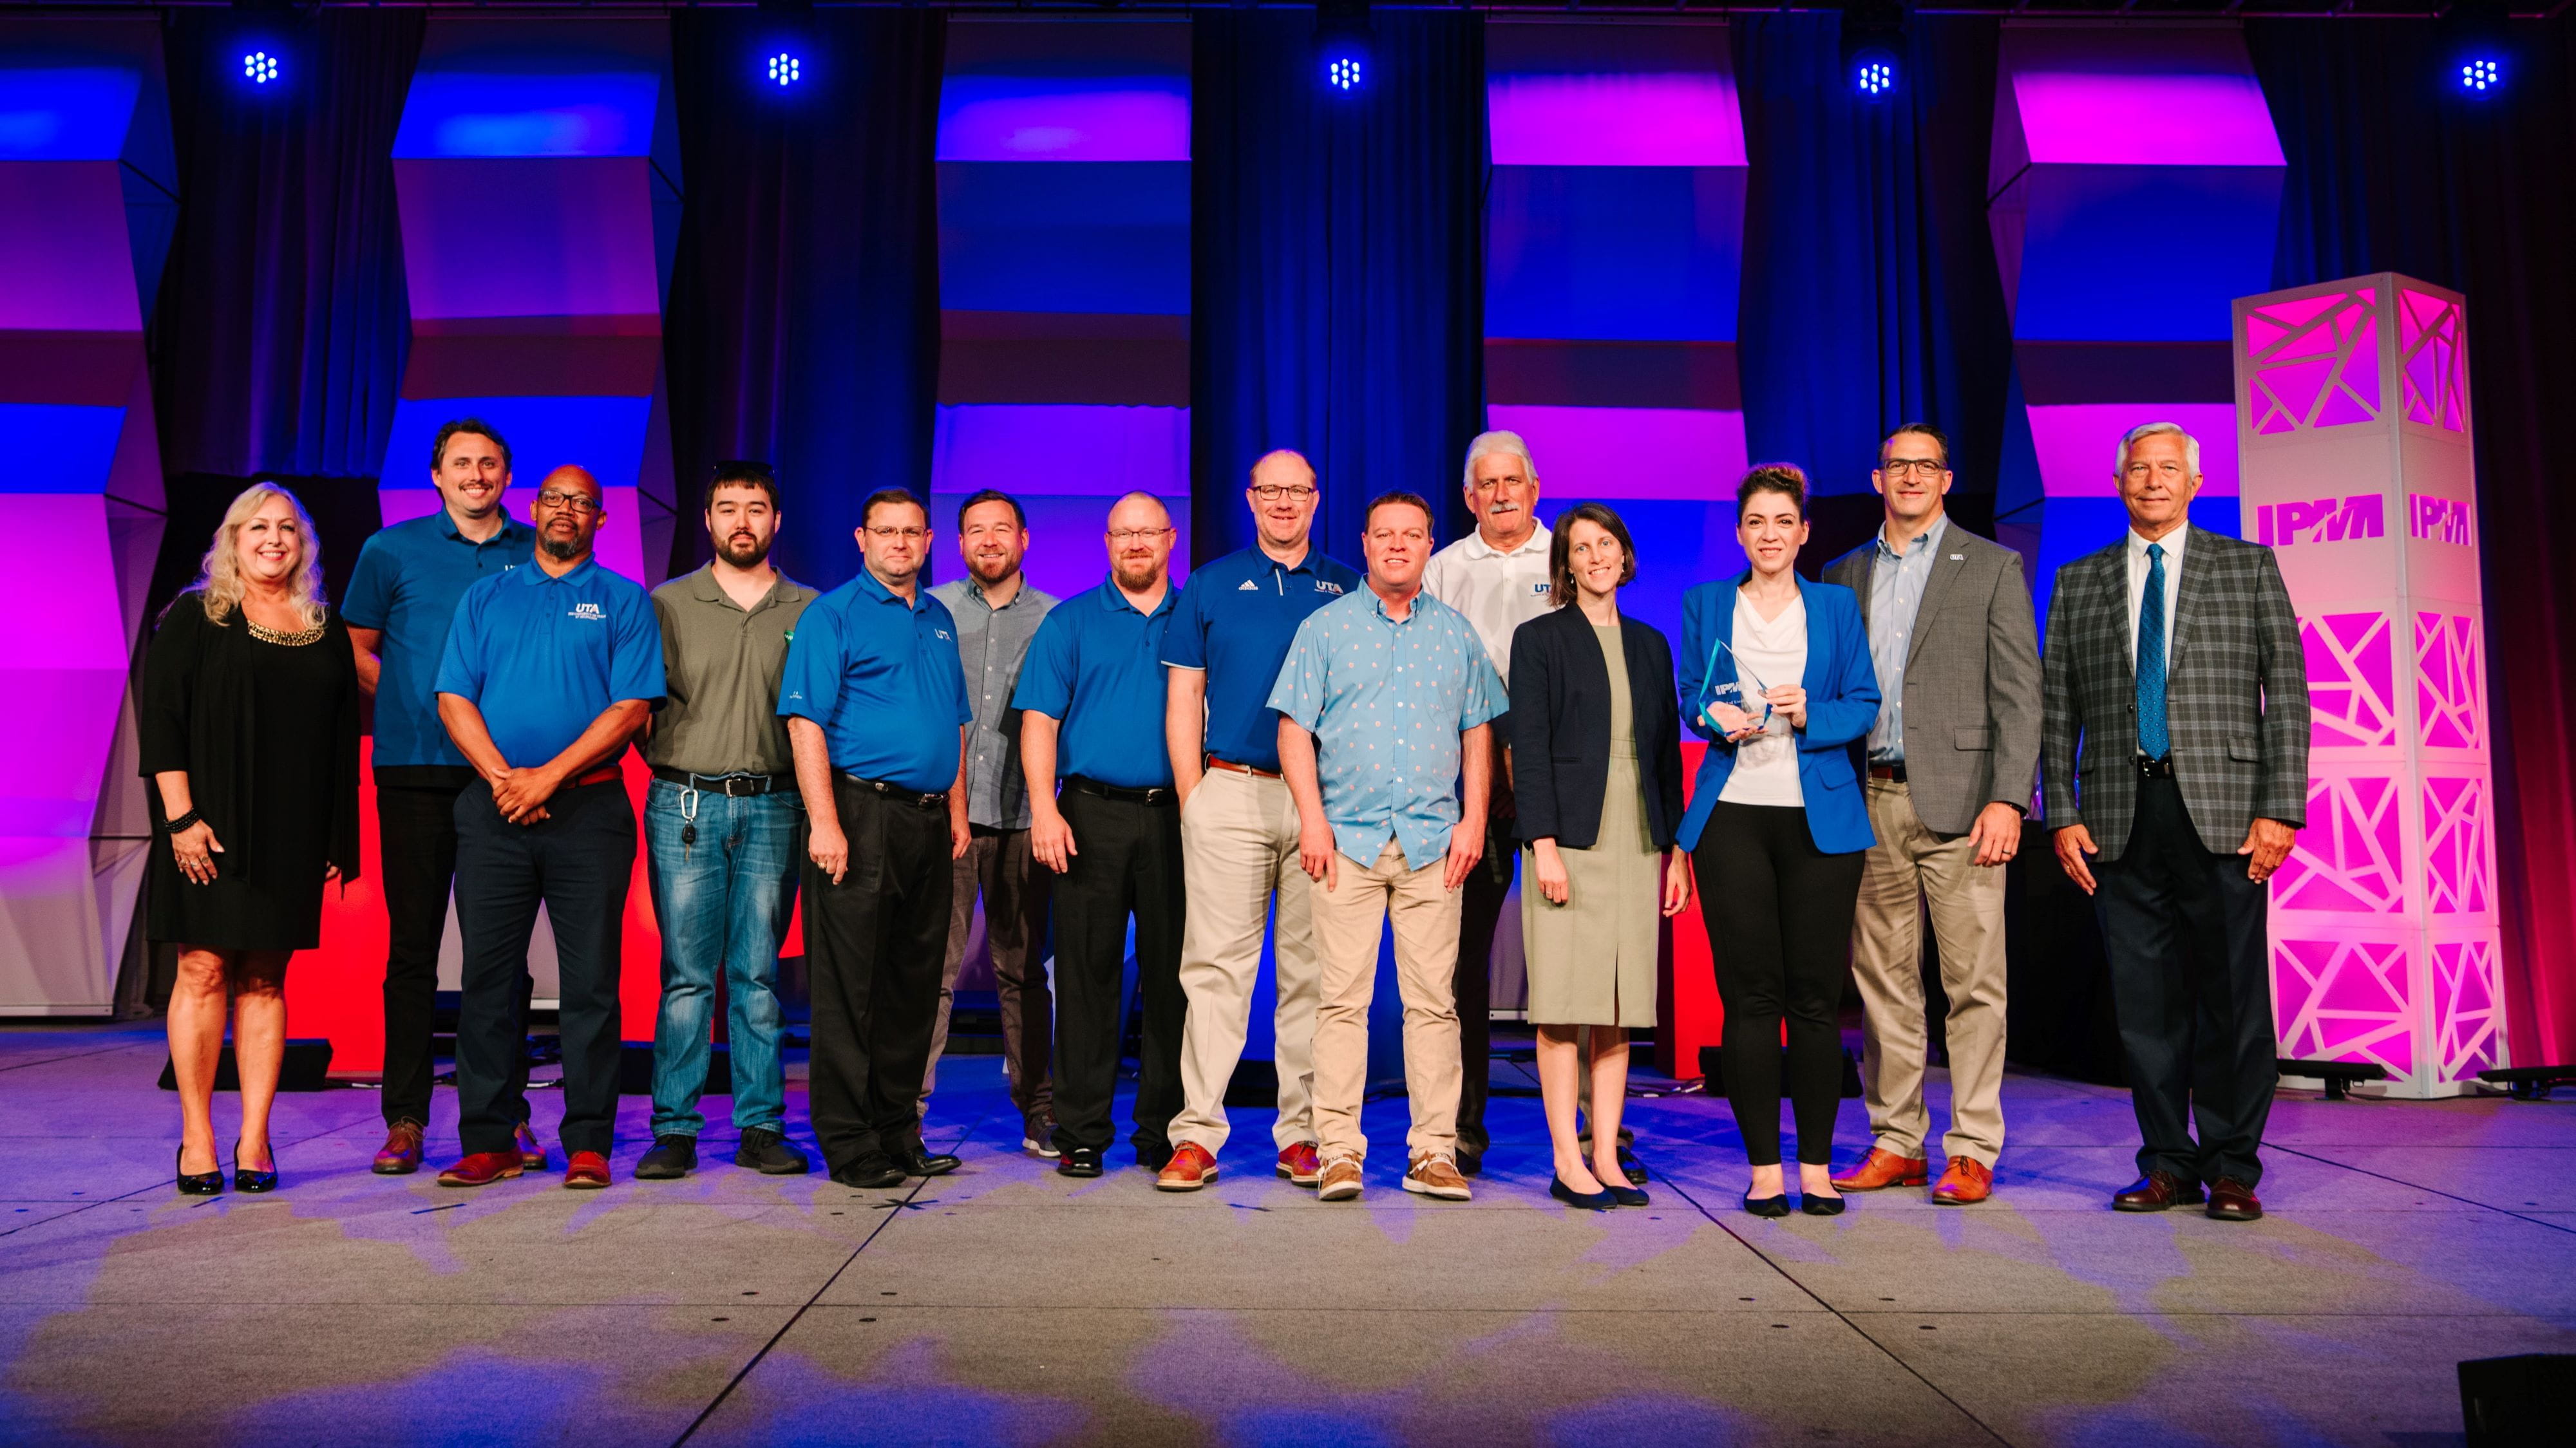 The University of Texas at Arlington received an Award of Excellence for Innovation from the International Parking & Mobility Institute." _languageinserted="true